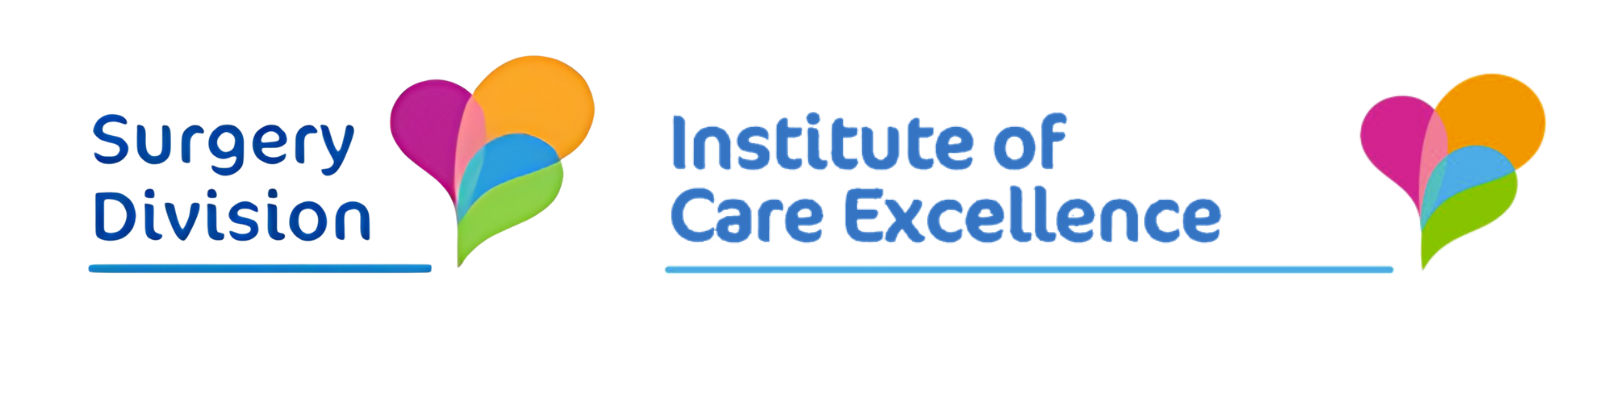 Partners Surgery Division and Institute of Care Excellence